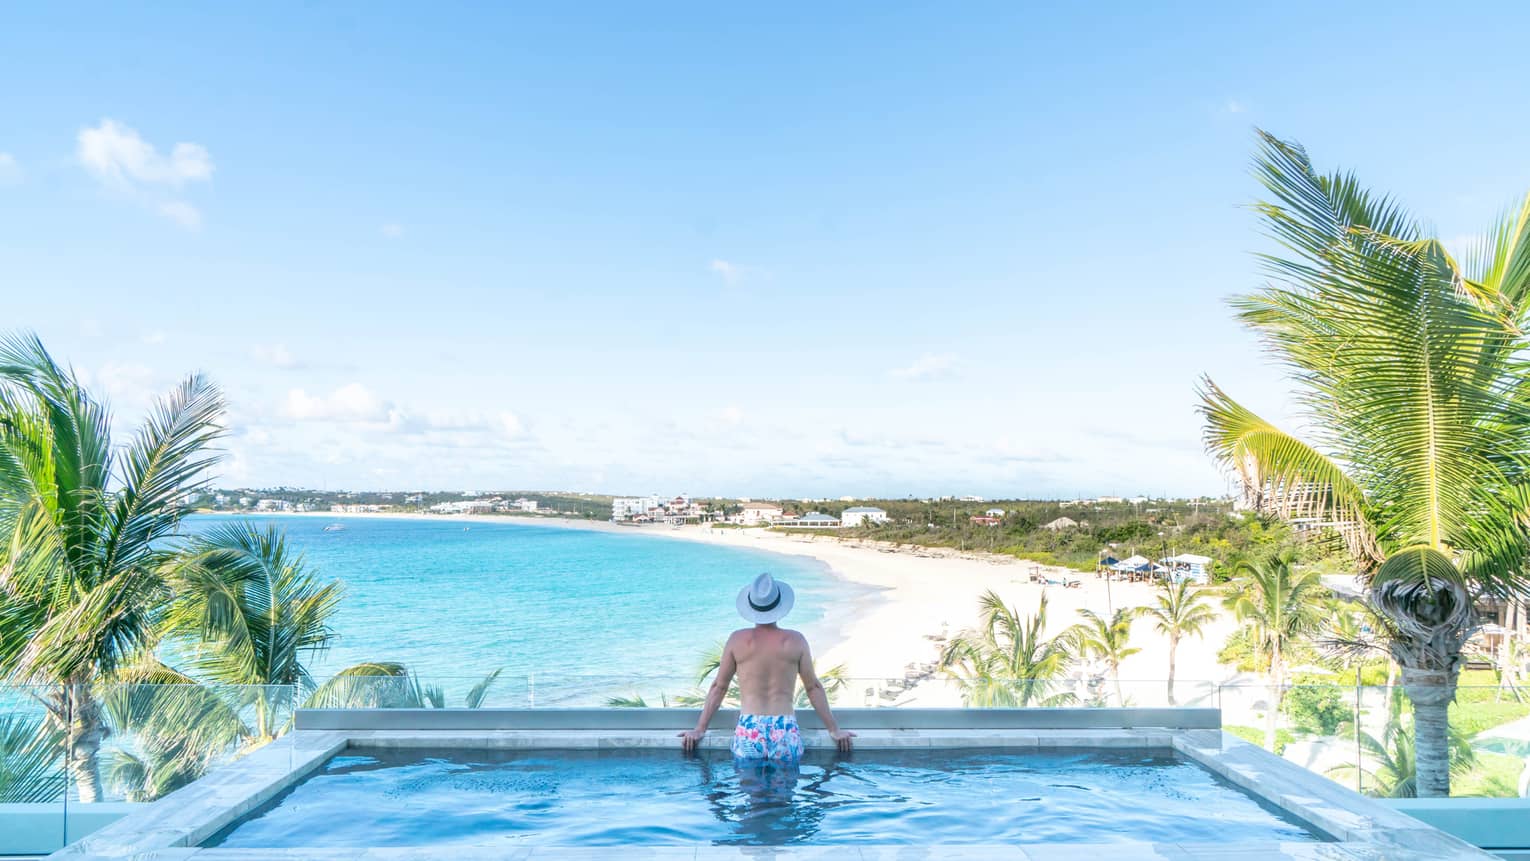 A man sitting at the edge of a pool looking across the ocean.